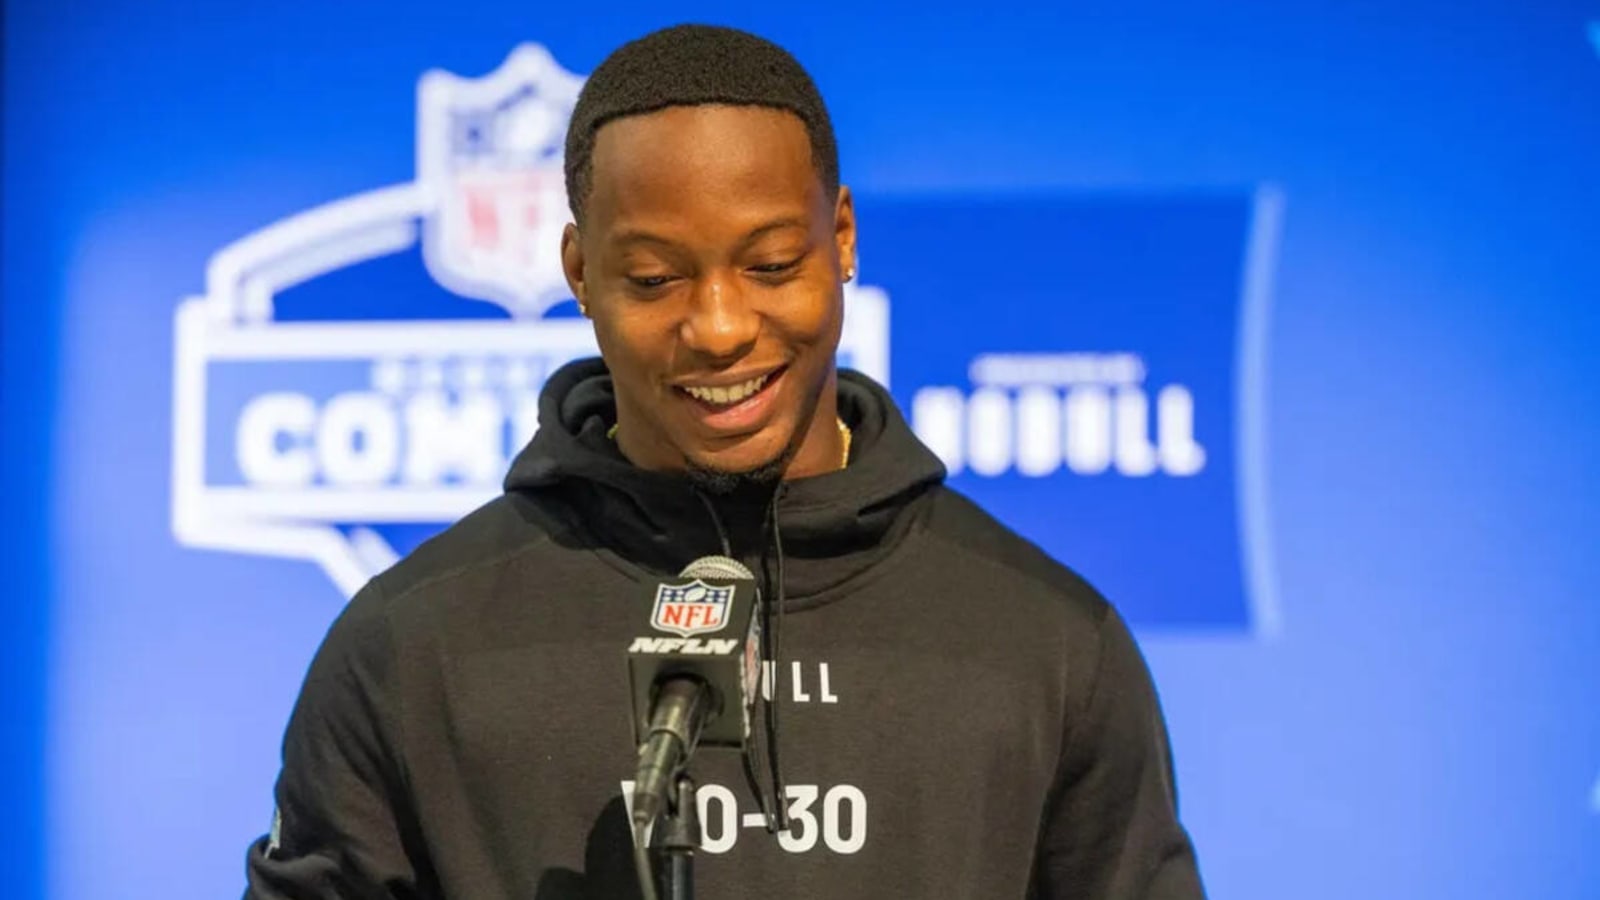 Browns rookie WR Jamari Thrash reveals what NFL wide receivers he watches most